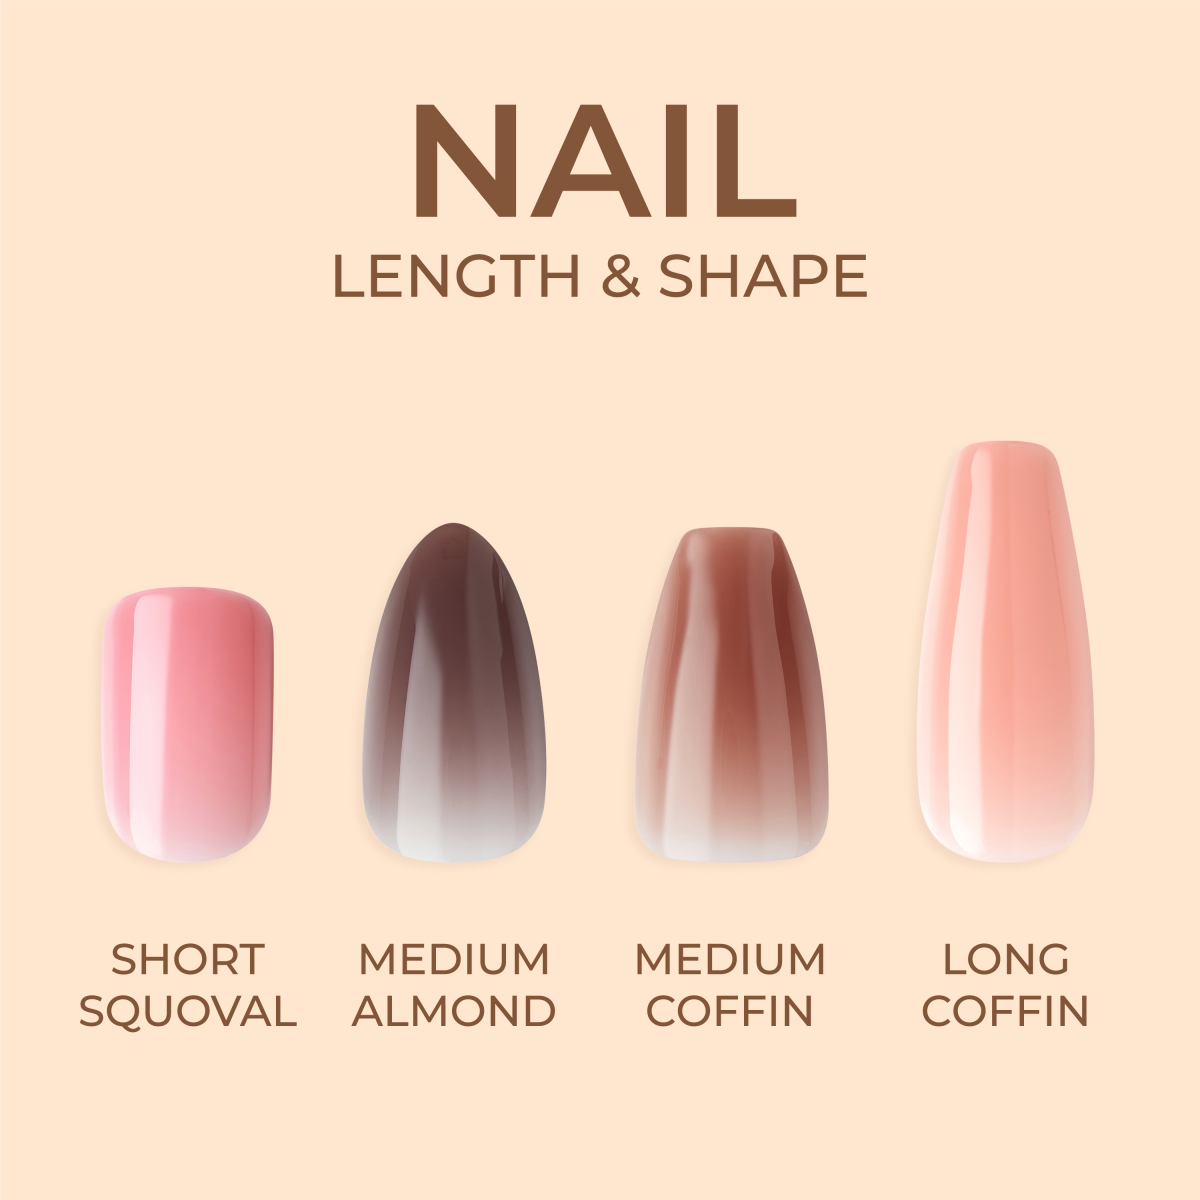 KISS Bare But Better, Press-On Nails, Nude Glow, Nude, Long Coffin, 28ct